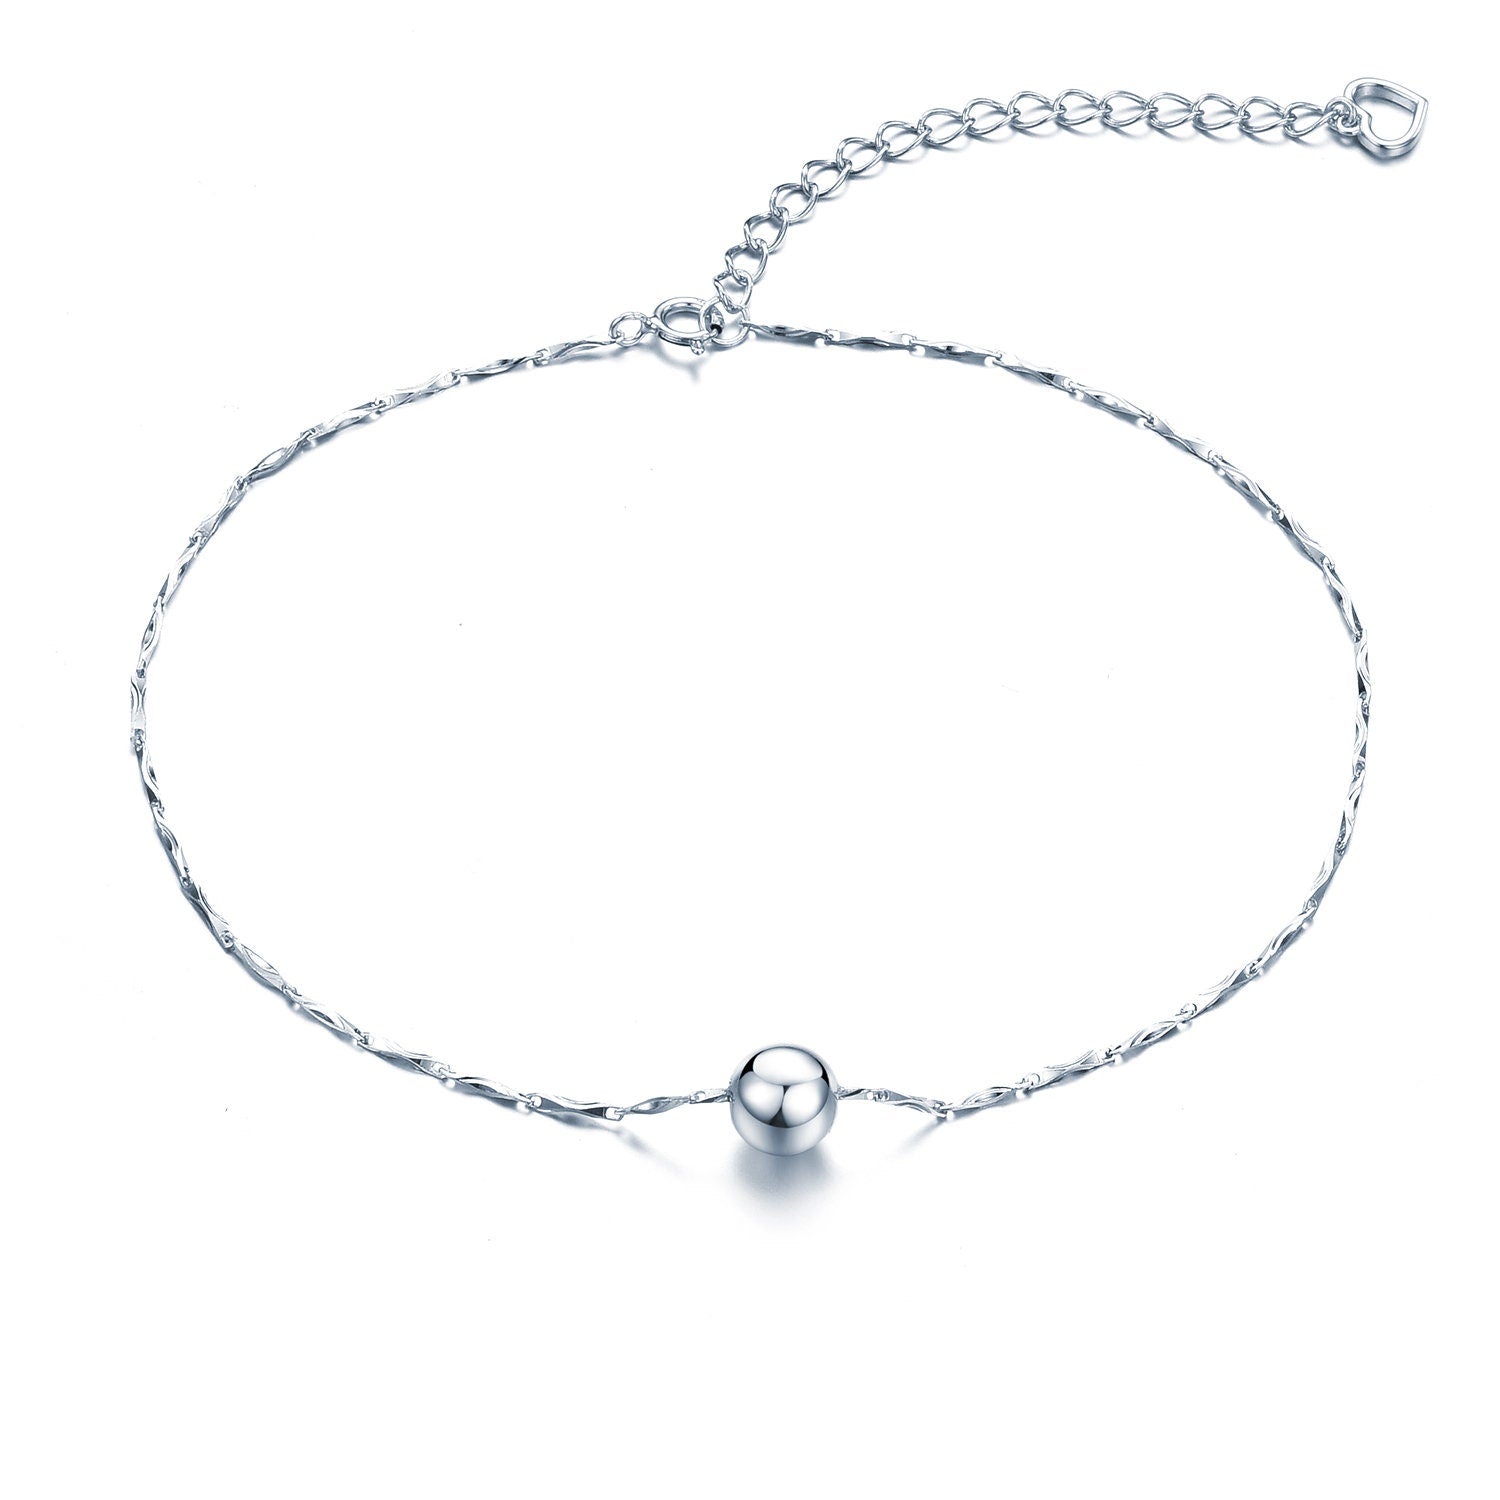 Avery - Simple Ball Style Anklet, Gold Anklets, Silver Anklets,Anklet, Anklets, Anklets for Women